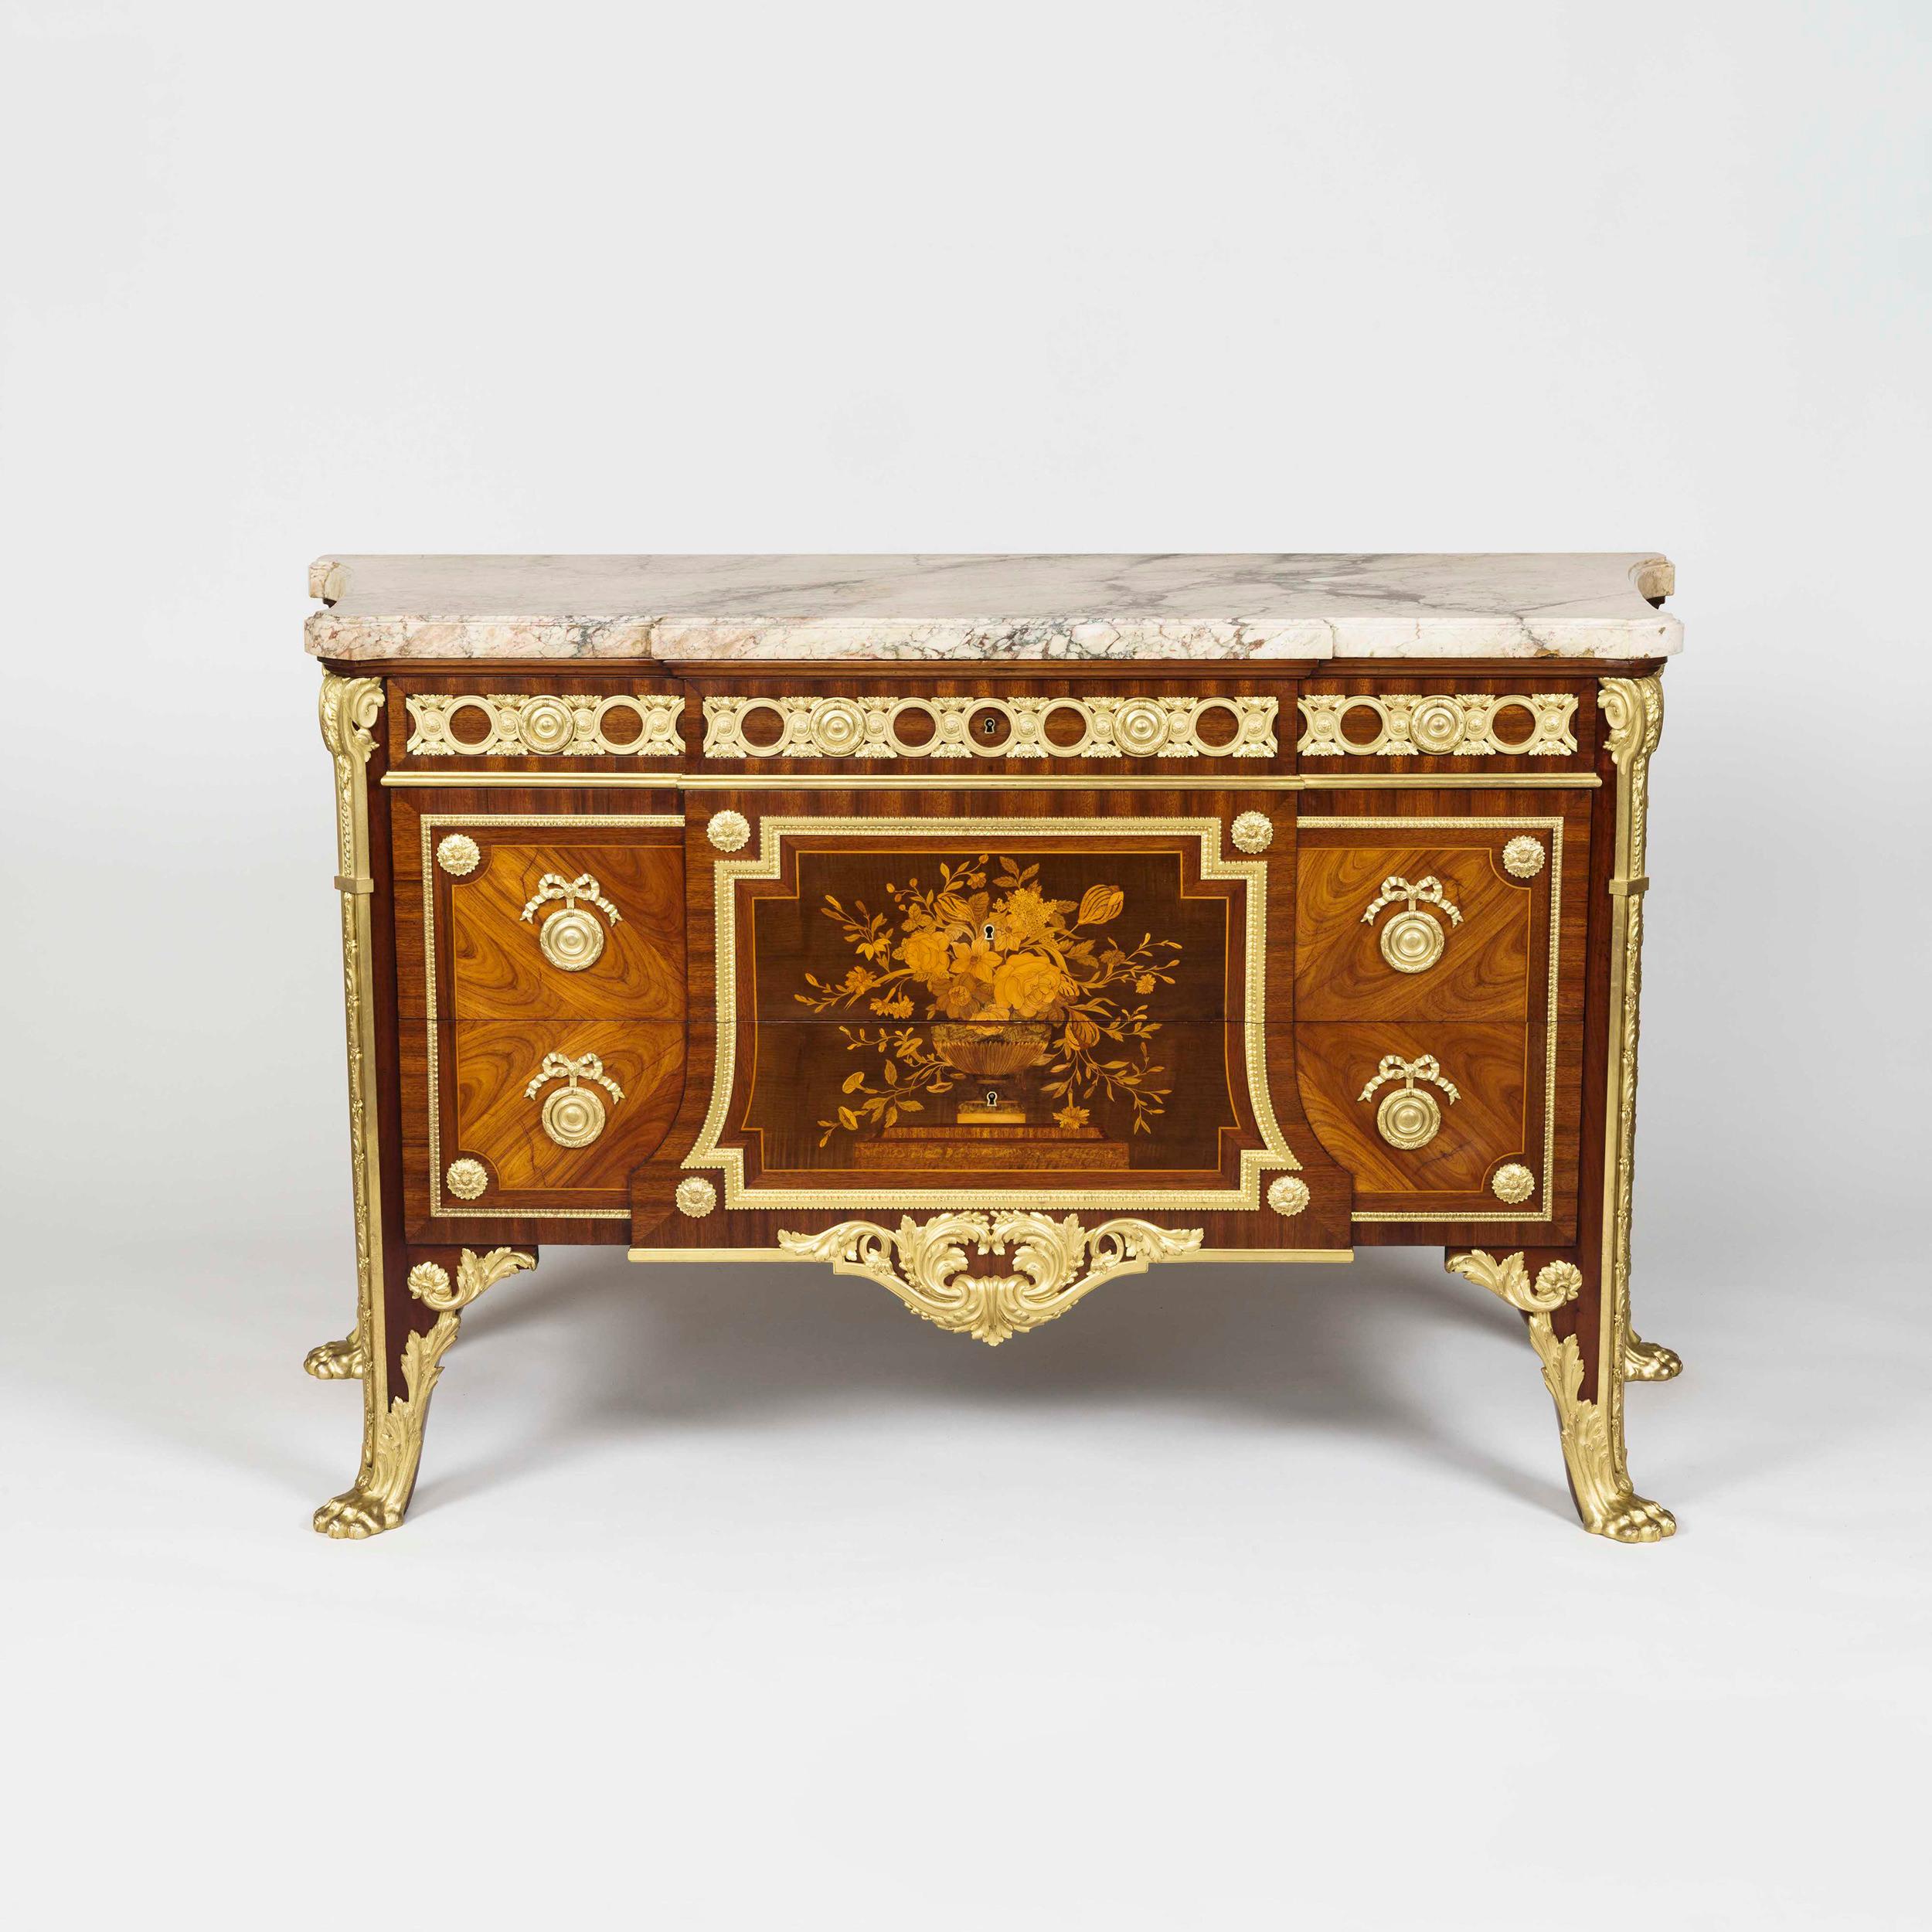 A very fine Louis XVI style gilt-bronze mounted marquetry commode
After the design by Jean-Henri Riesener (1734-1806)

After a model by Jean-Henri Riesener, supplied to Princess Adélaïde for Versailles. Constructed from amaranth with veneered